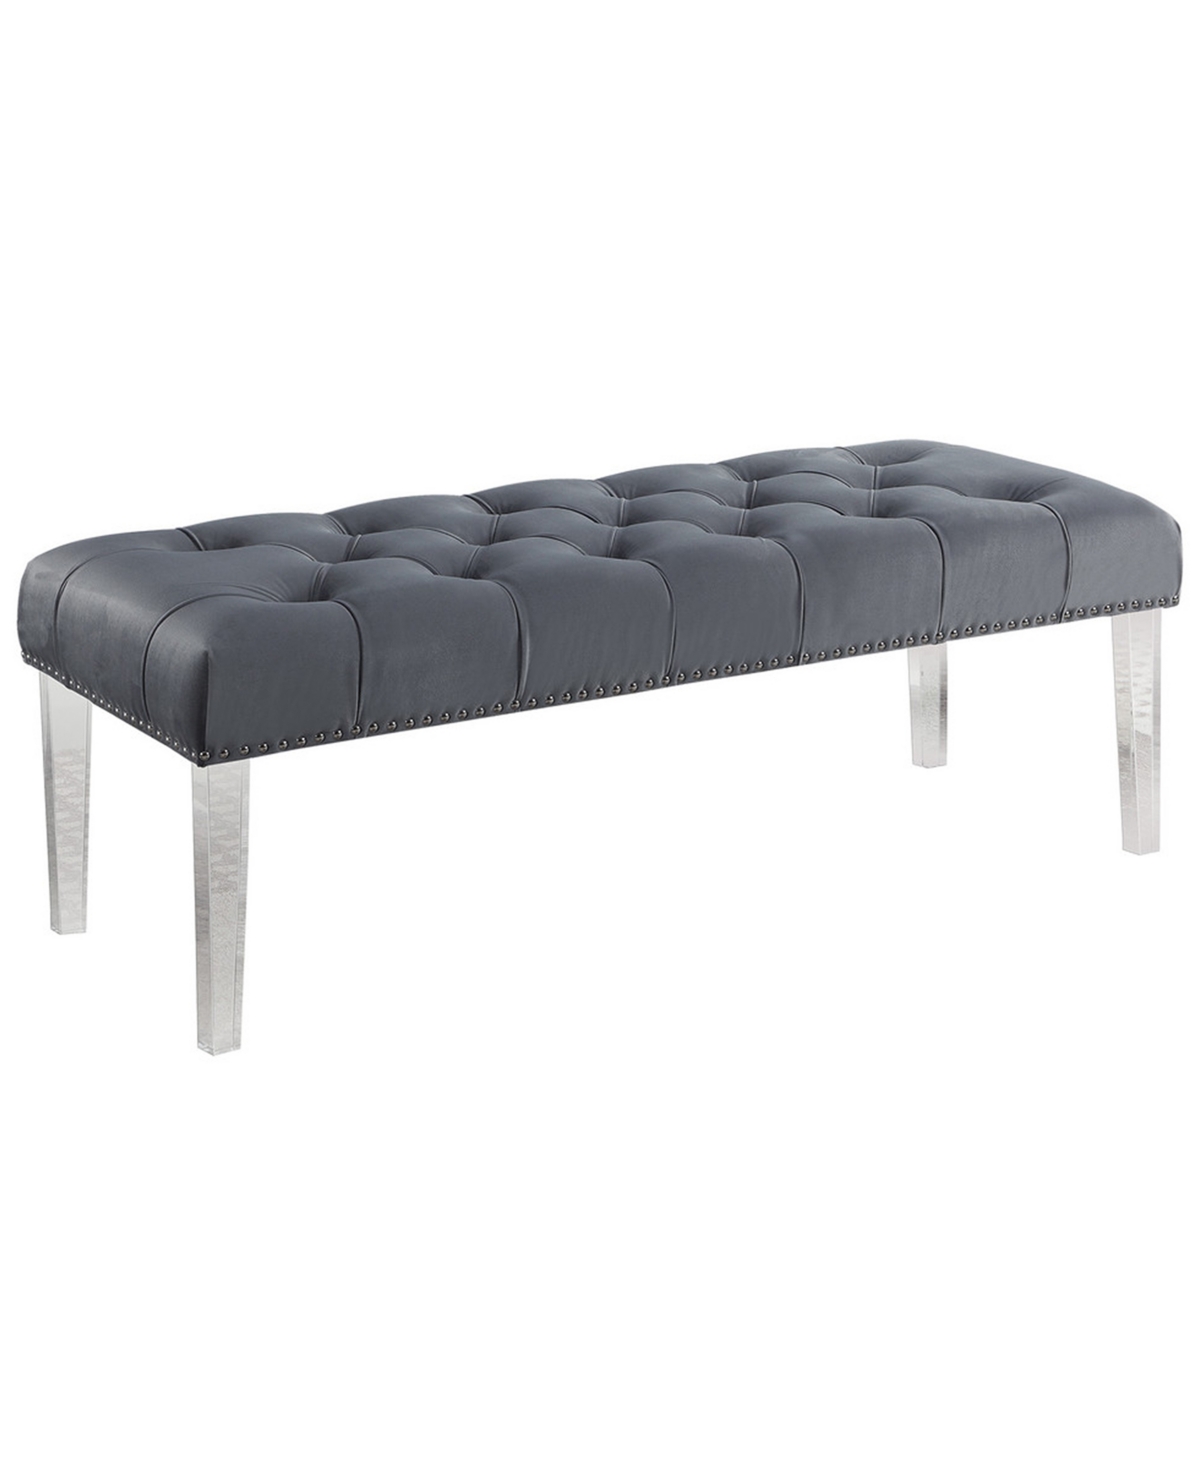 Thomas Suede Upholstered Tufted Bench with Acrylic Legs